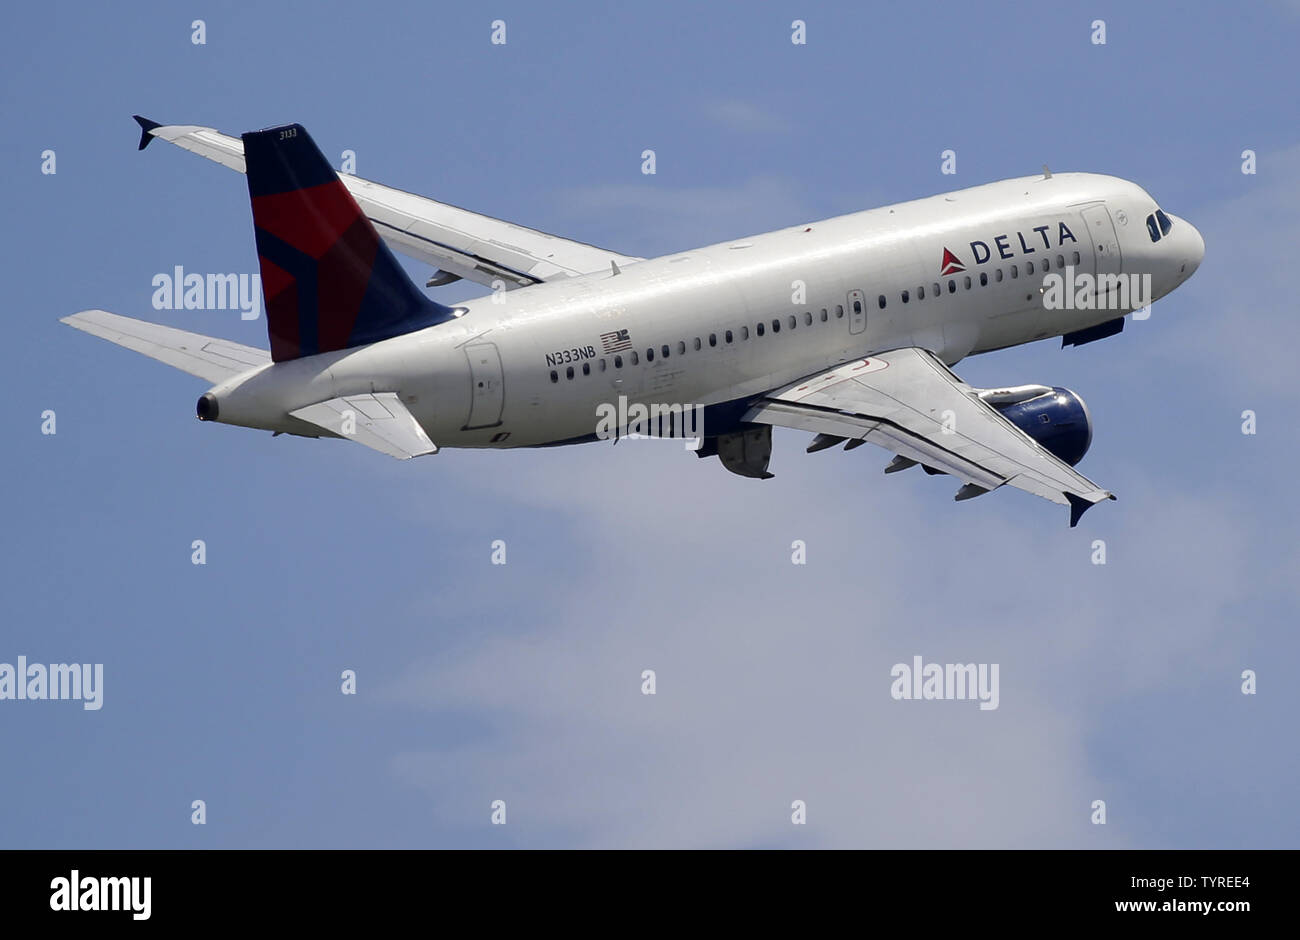 A Delta Airlines plane takes off from LaGuardia Airport in New York City on August 8, 2016 in New York City. Delta began to resume flights but still expect massive cancelations and delays after after a computer glitch shut down the airline completely this morning.    Photo by John Angelillo/UPI Stock Photo